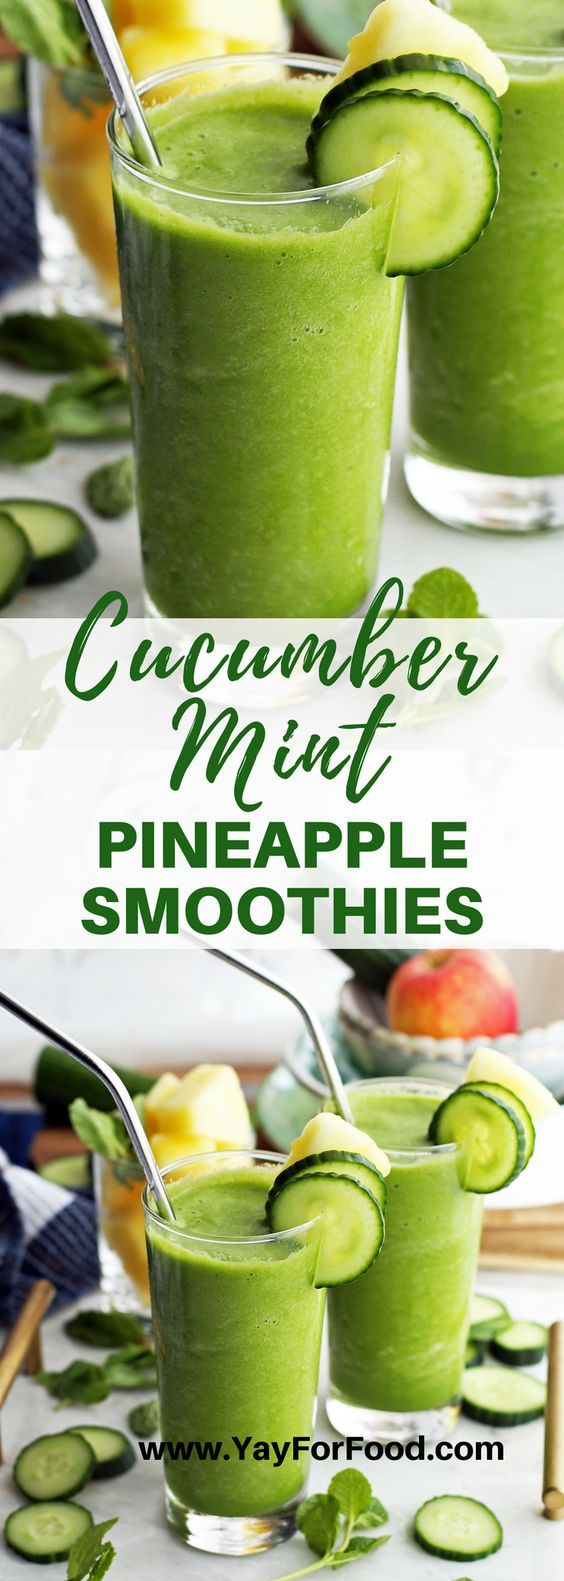 Cucumber mint smoothies are a healthy snack to eat on the go. See more quick snacks that will keep you healthy here:  https://www.developgoodhabits.com/healthy-snack-ideas-and-recipes/ Discover choices of snacks that burn fat. #healthyeating #mealprep